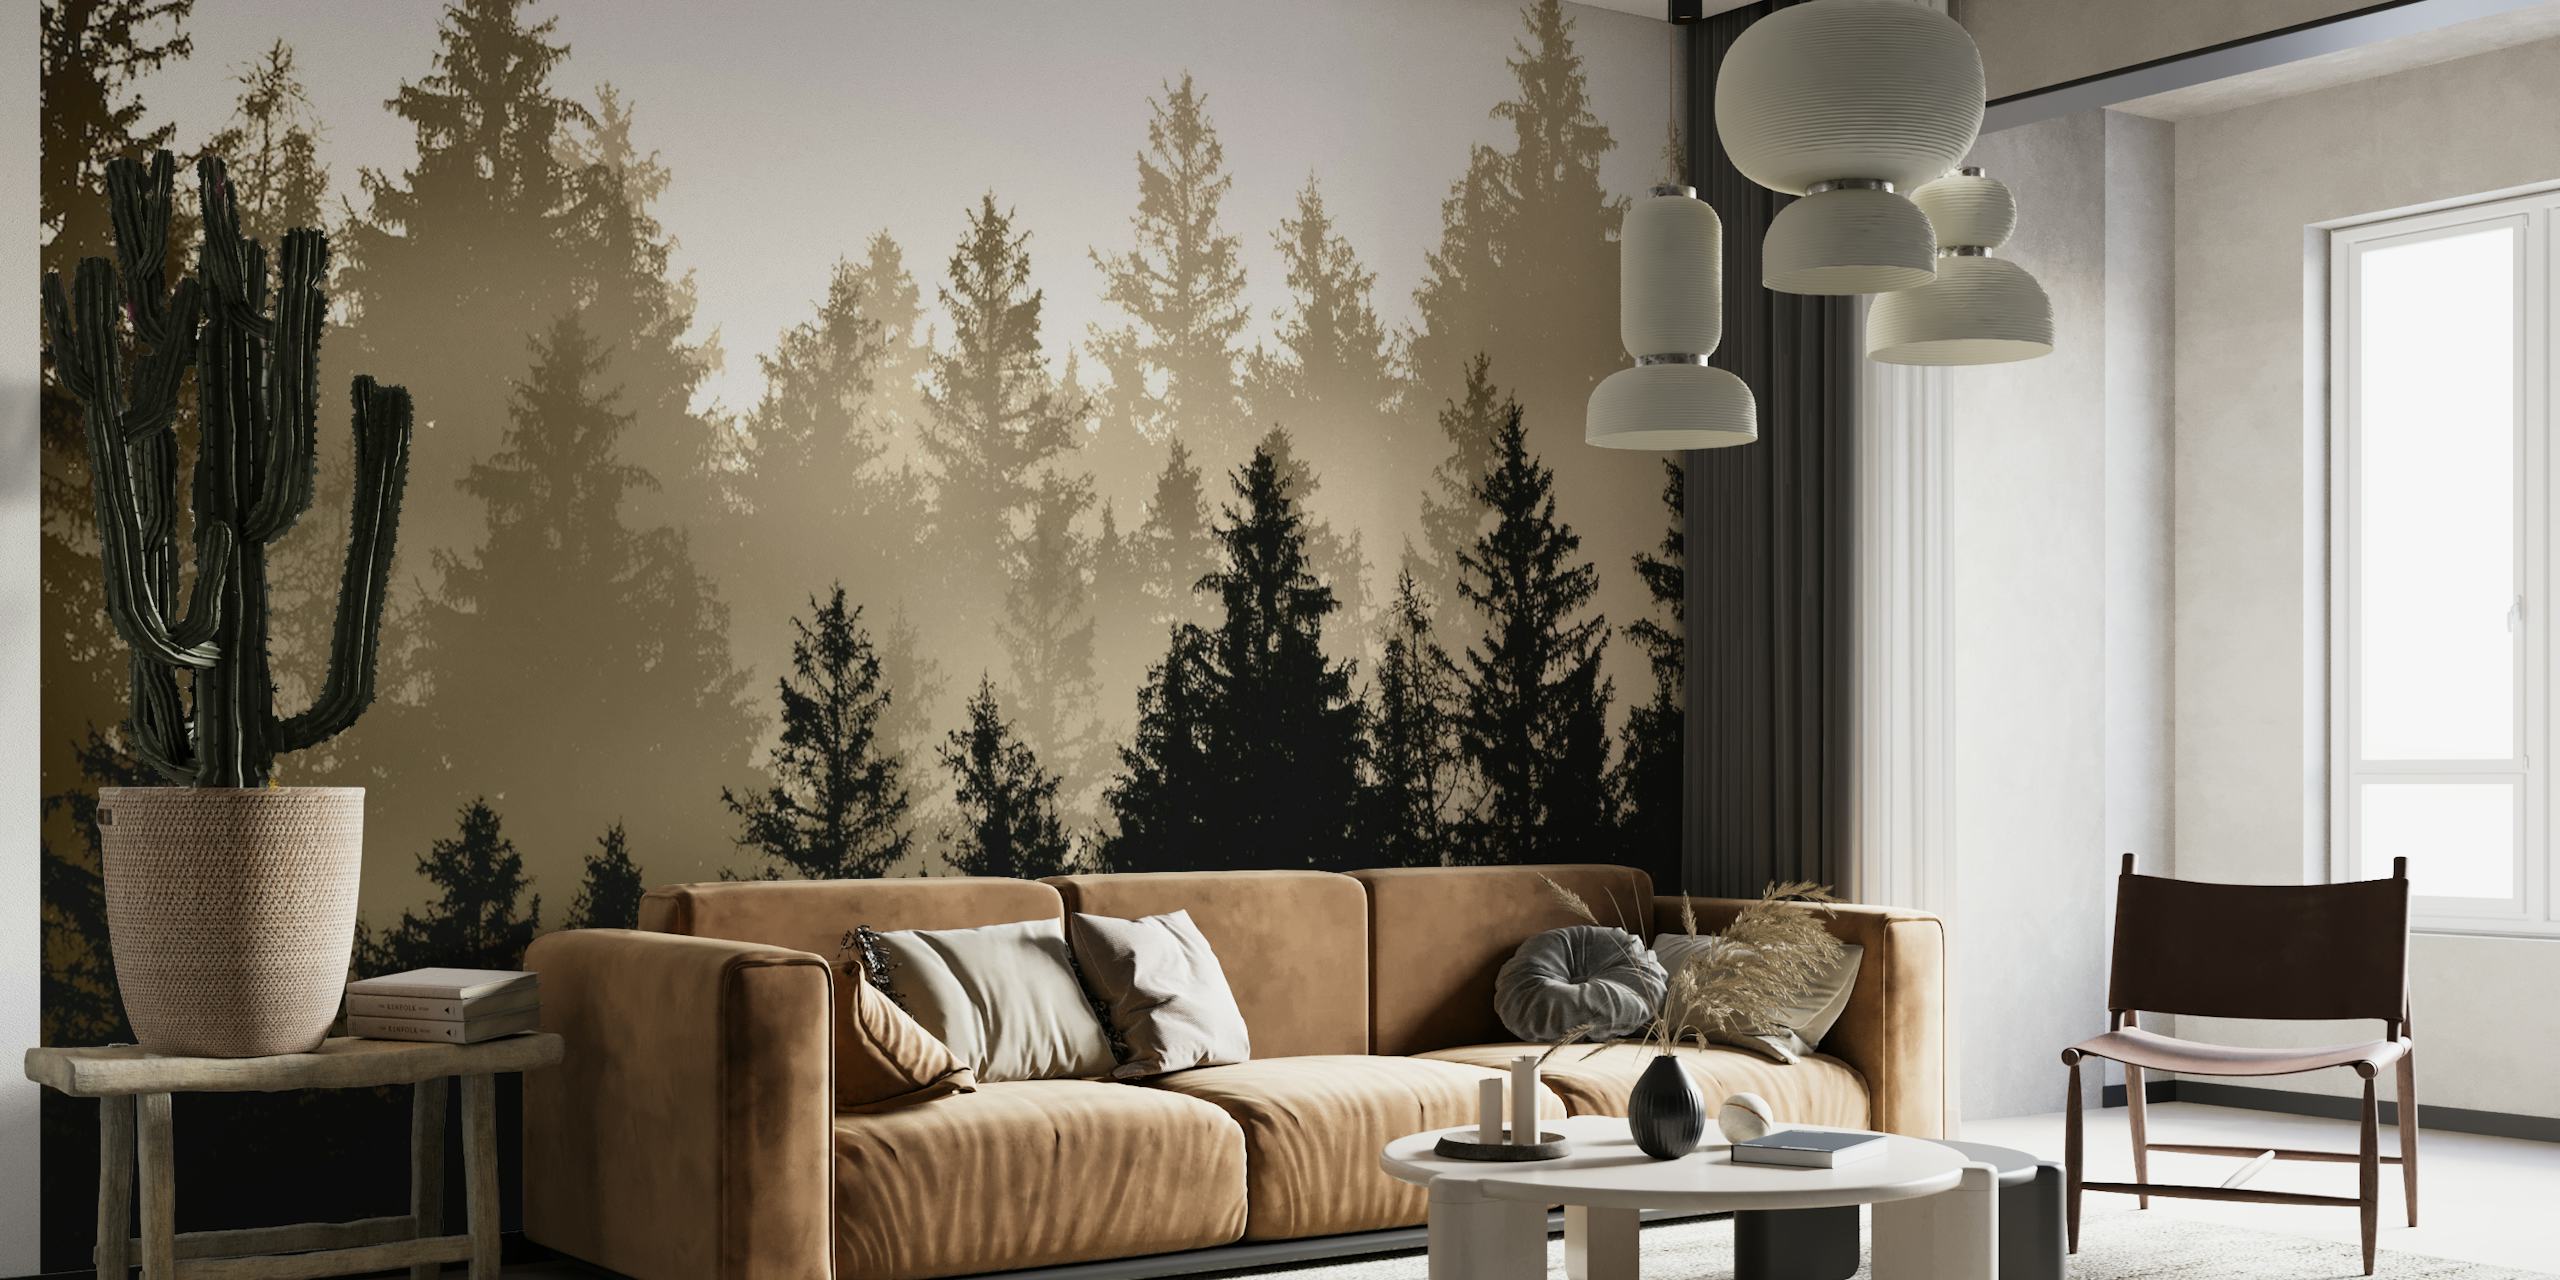 Misty forest silhouette wall mural in sepia tones